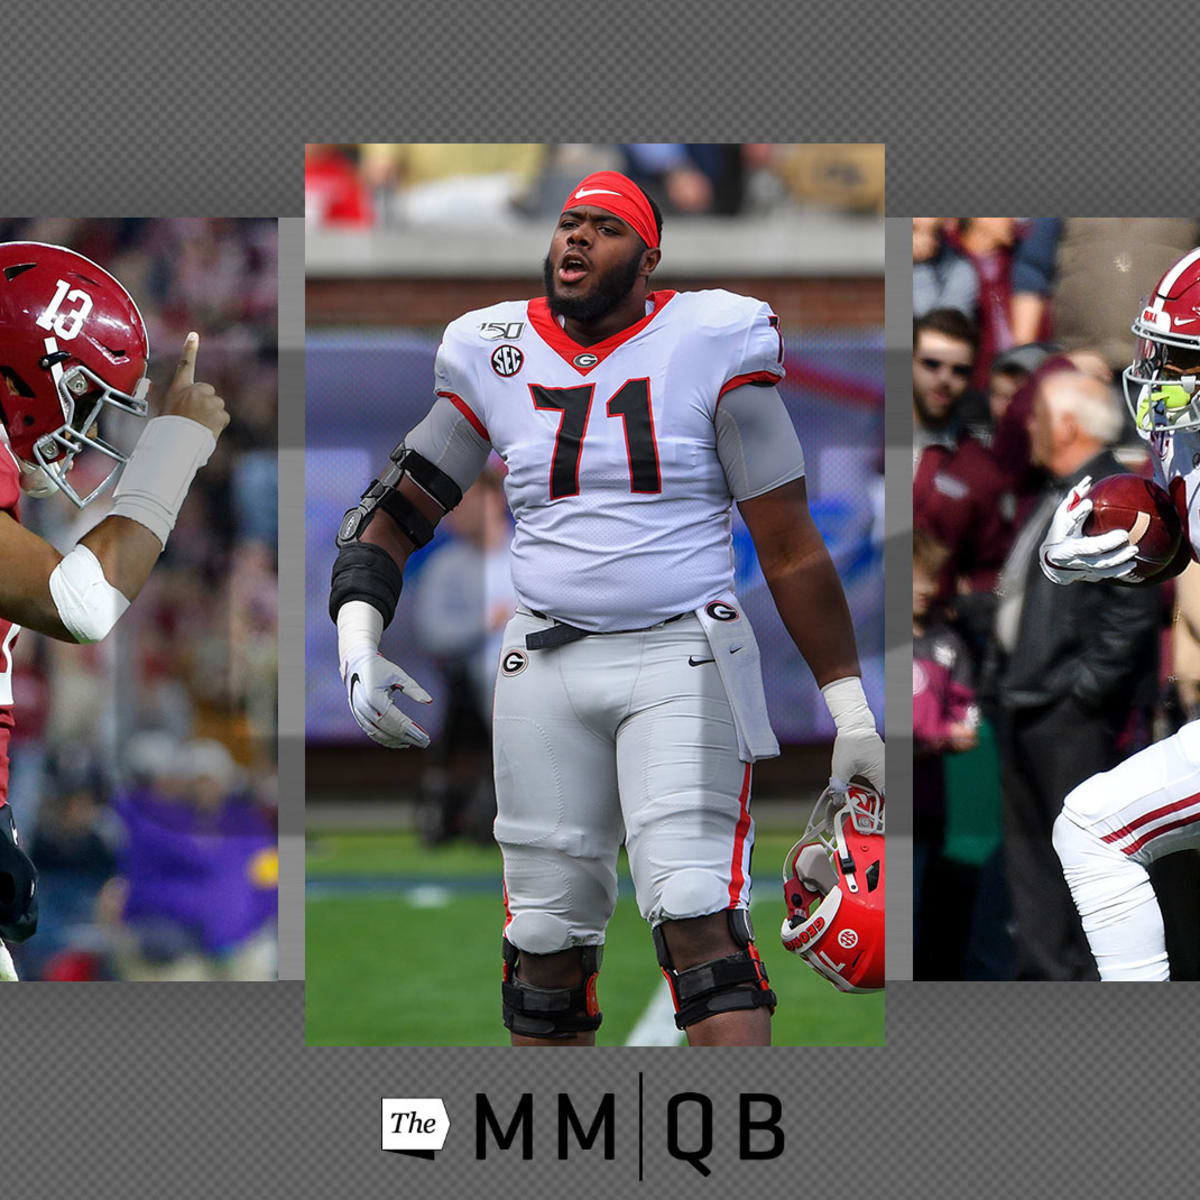 NY Jets 7-round mock draft: Jets load up on coveted defensive